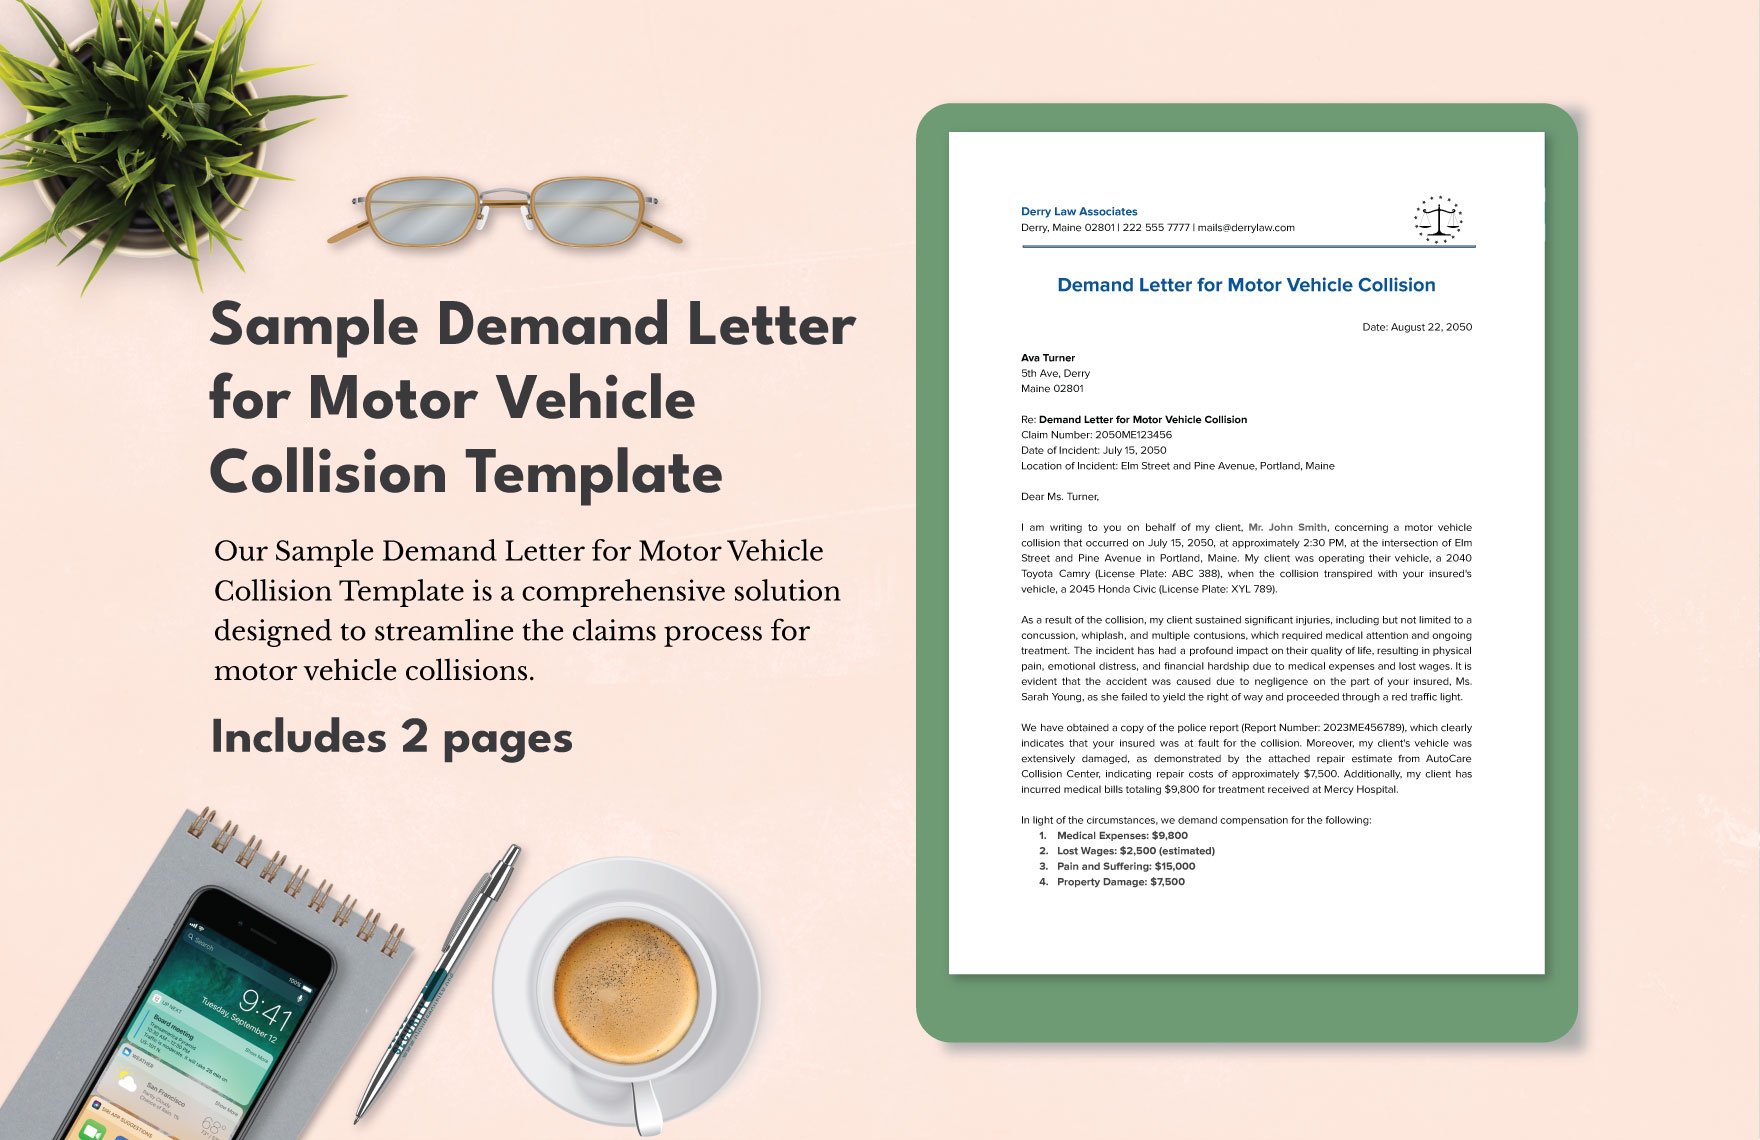 Sample Demand Letter for Motor Vehicle Collision Template